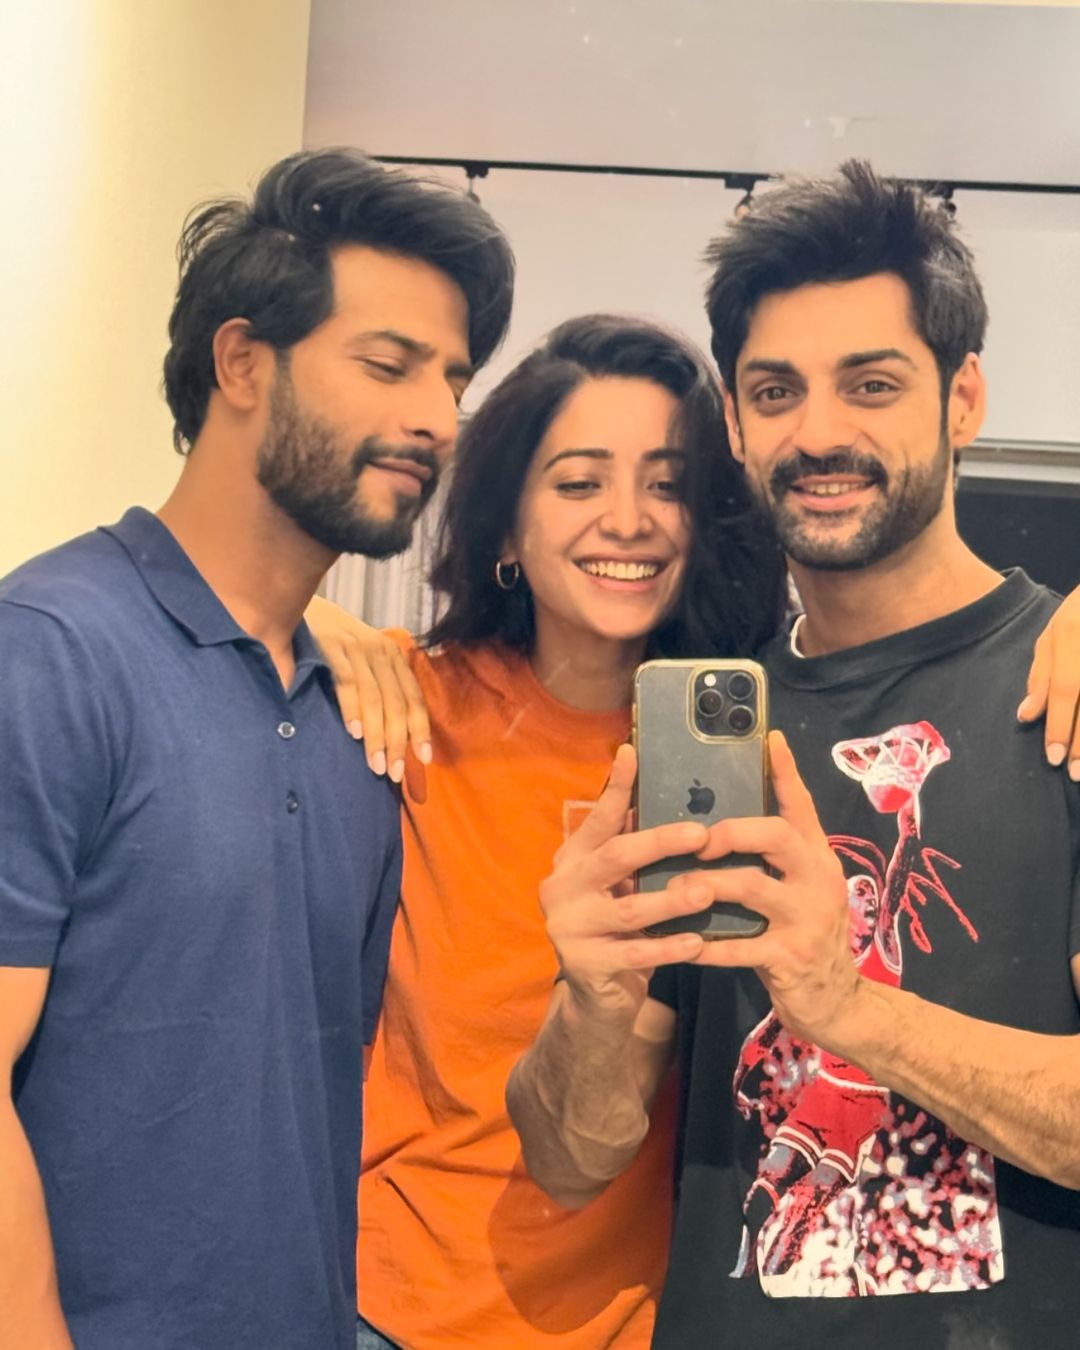 Other Than Karan Wahi, None Can Bliss Us With Heart-Warming BFF Moments! Seek The Reason Here How!